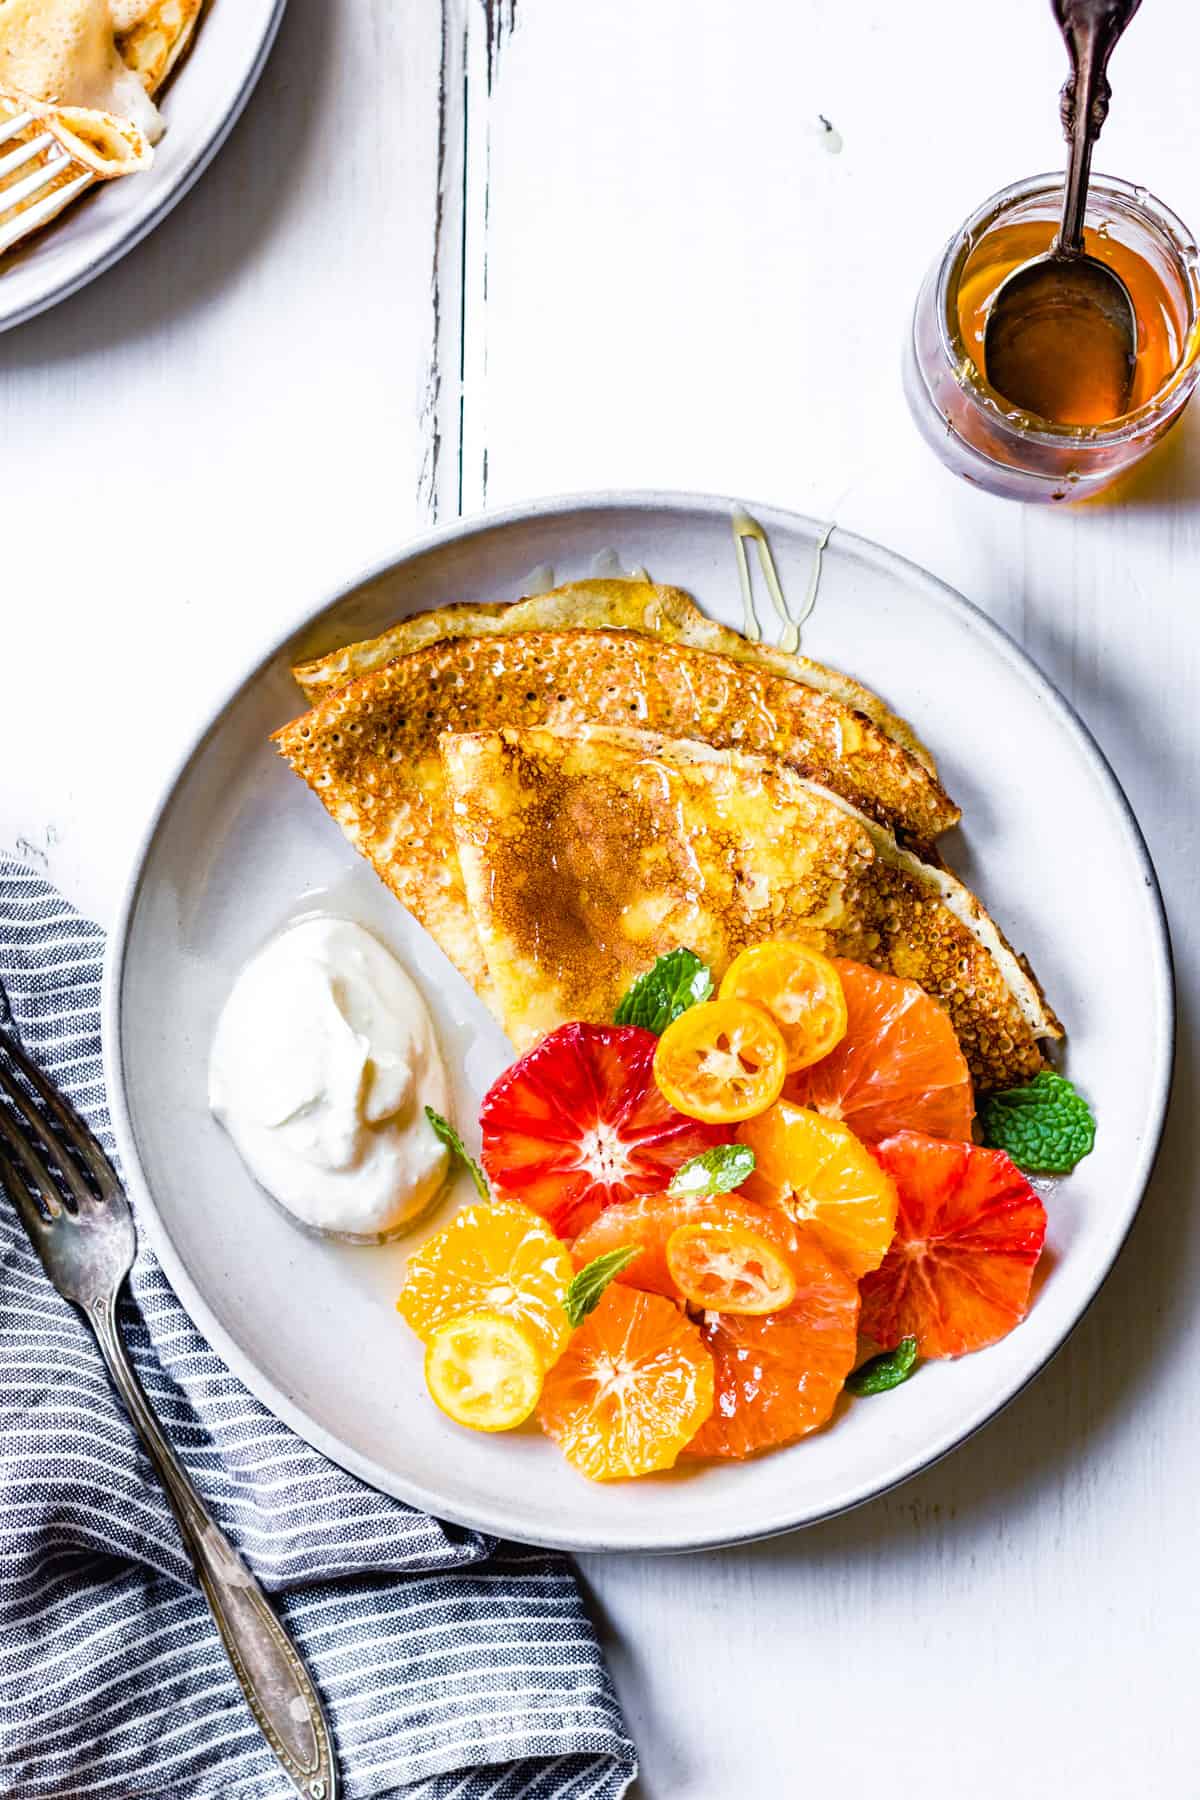 delicious Gluten Free Crepes With Ricotta, Citrus, and Honey